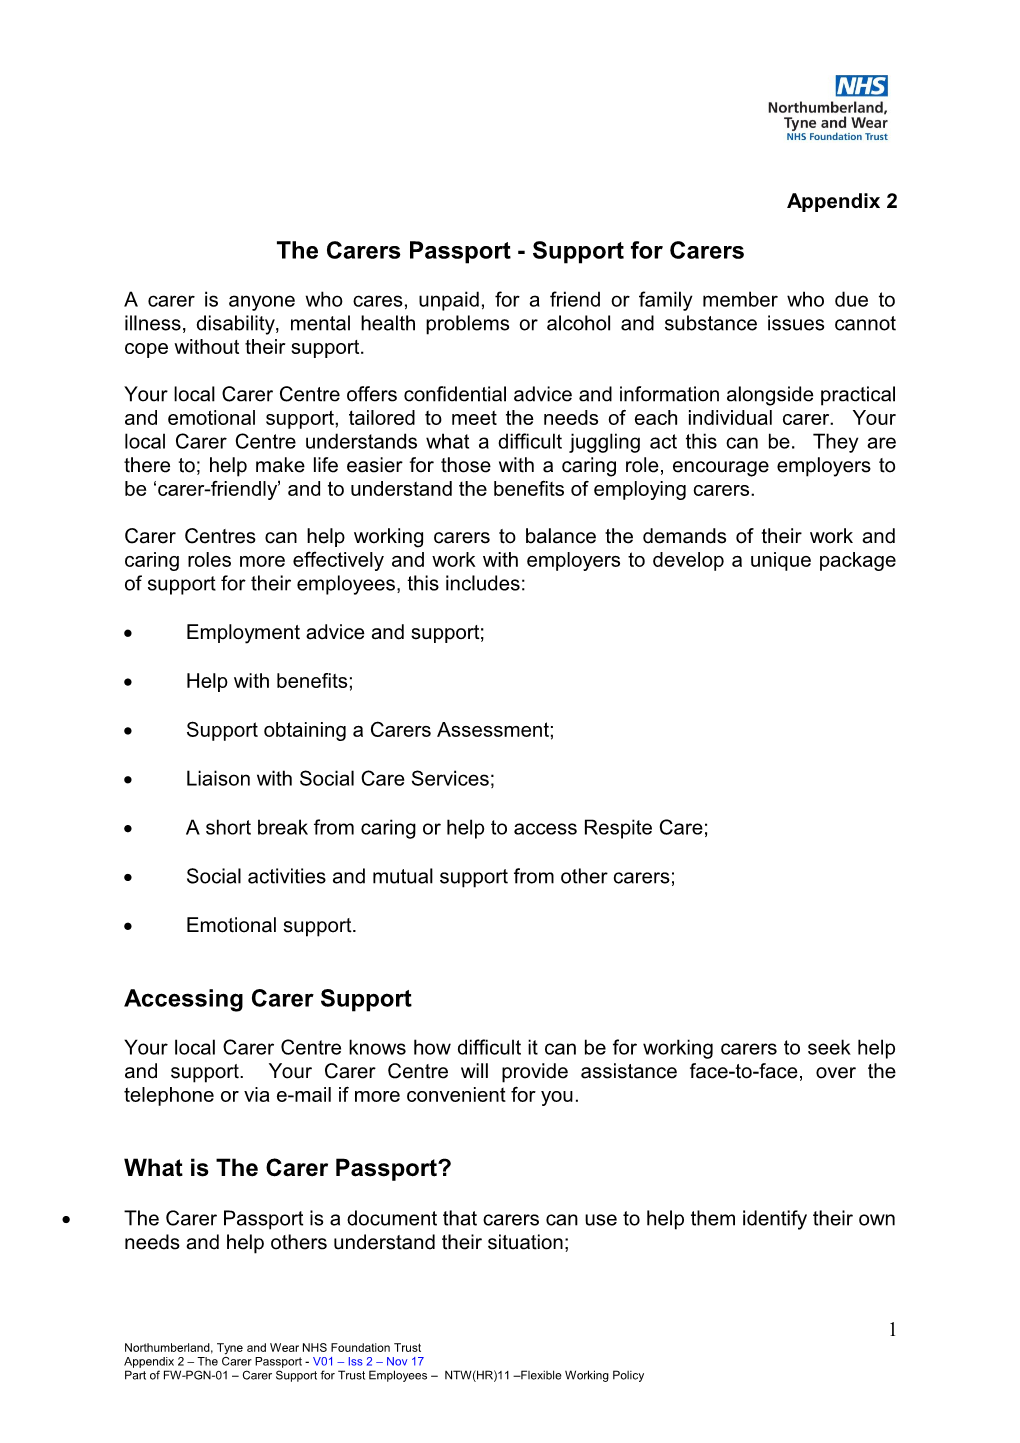 The Carers Passport - Support for Carers